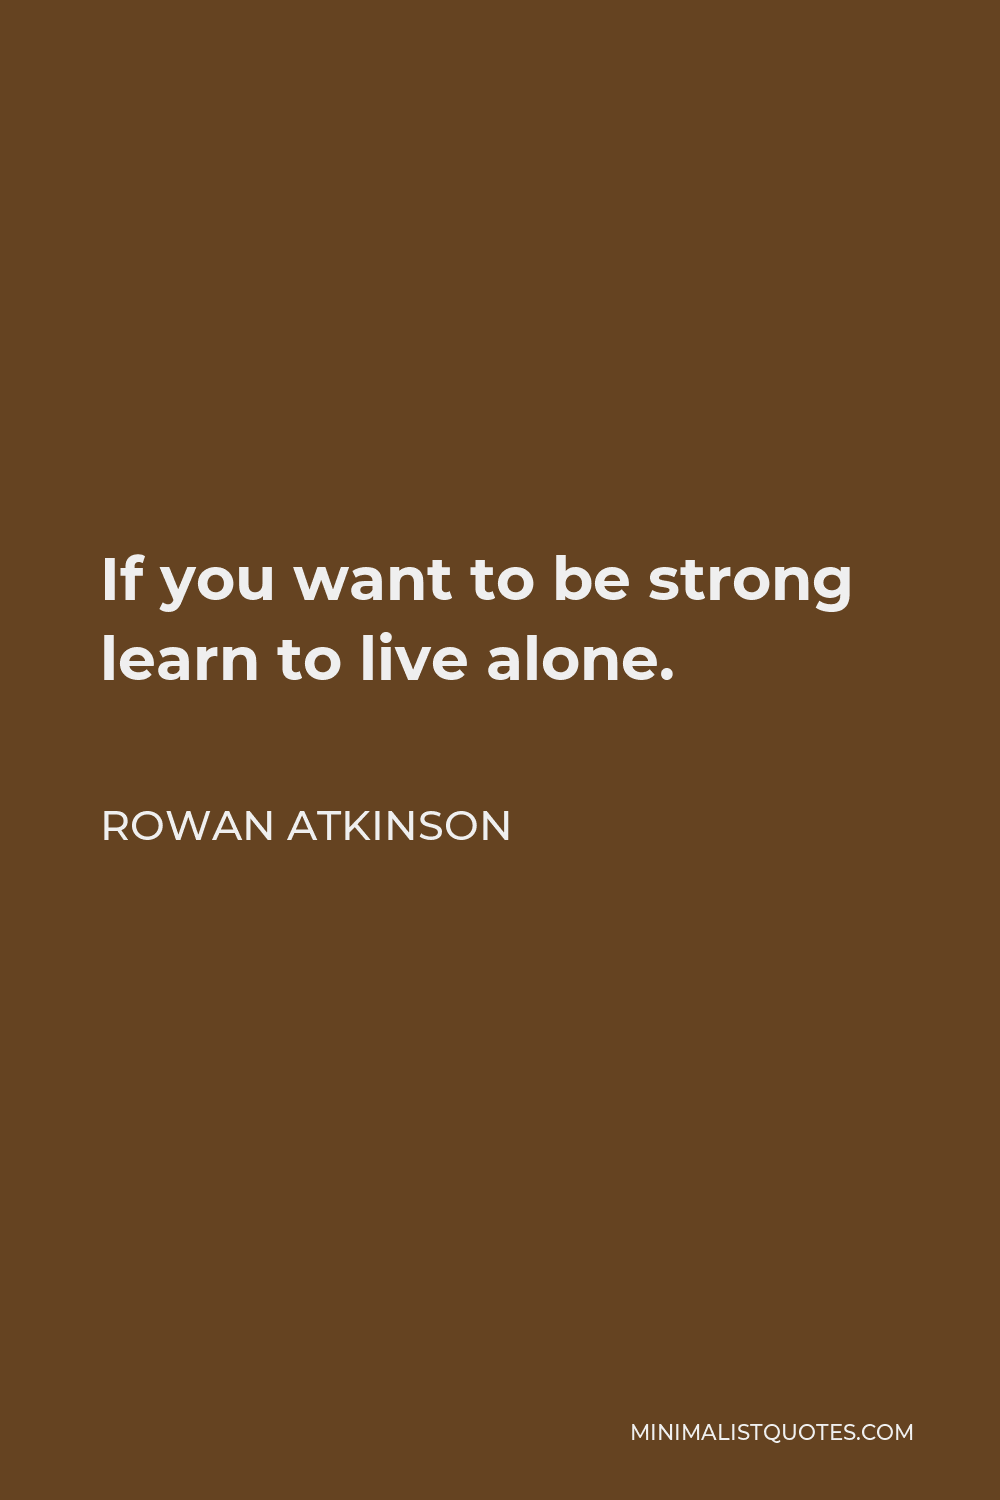 Rowan Atkinson Quote - If you want to be strong learn to live alone.